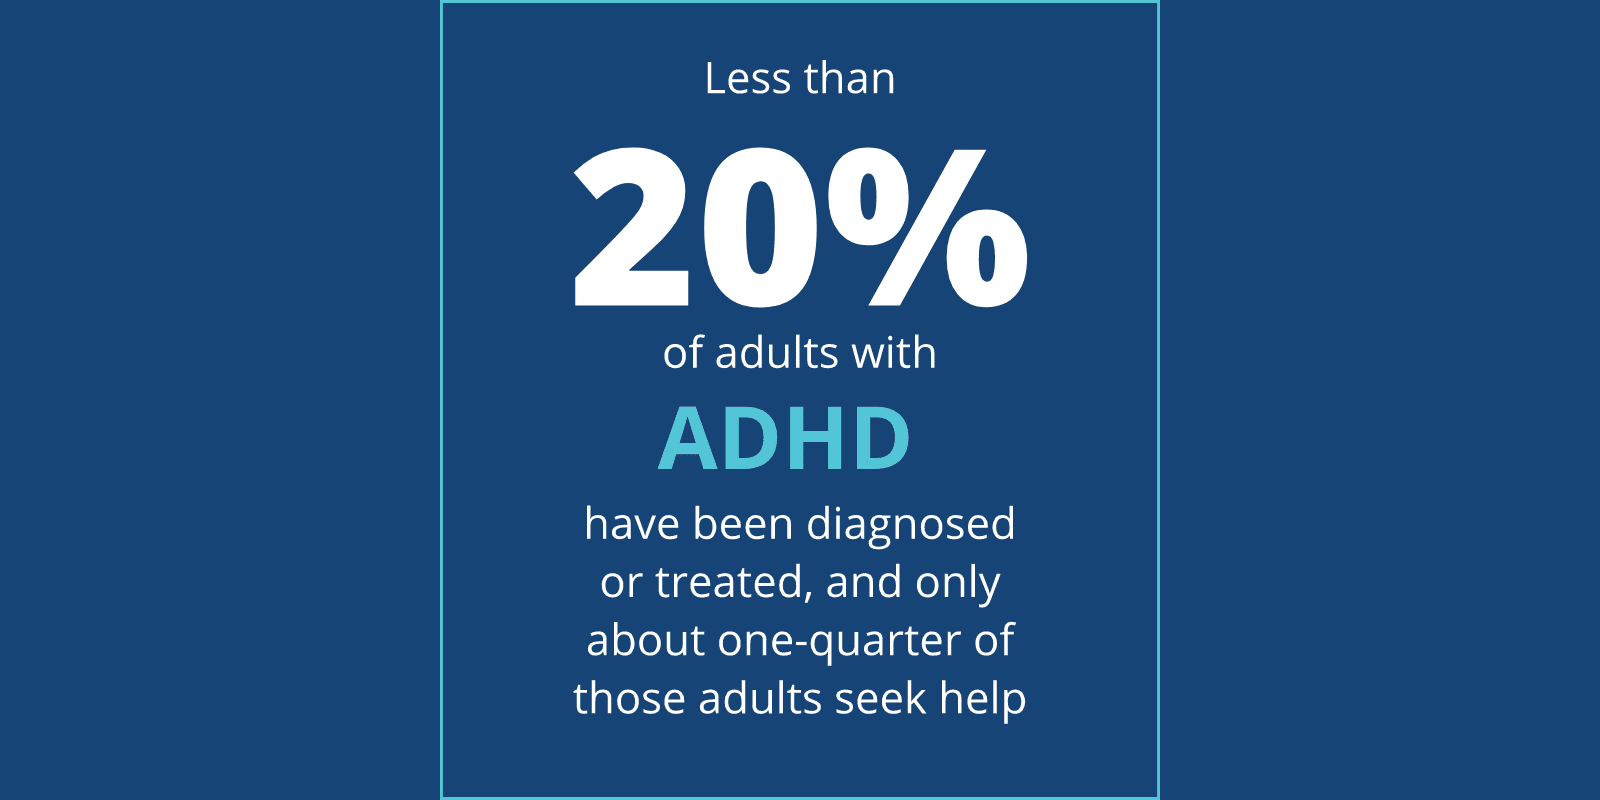 Less than 20% of adults with ADHD have been diagnosed, and only one-quarter of those adults seek help